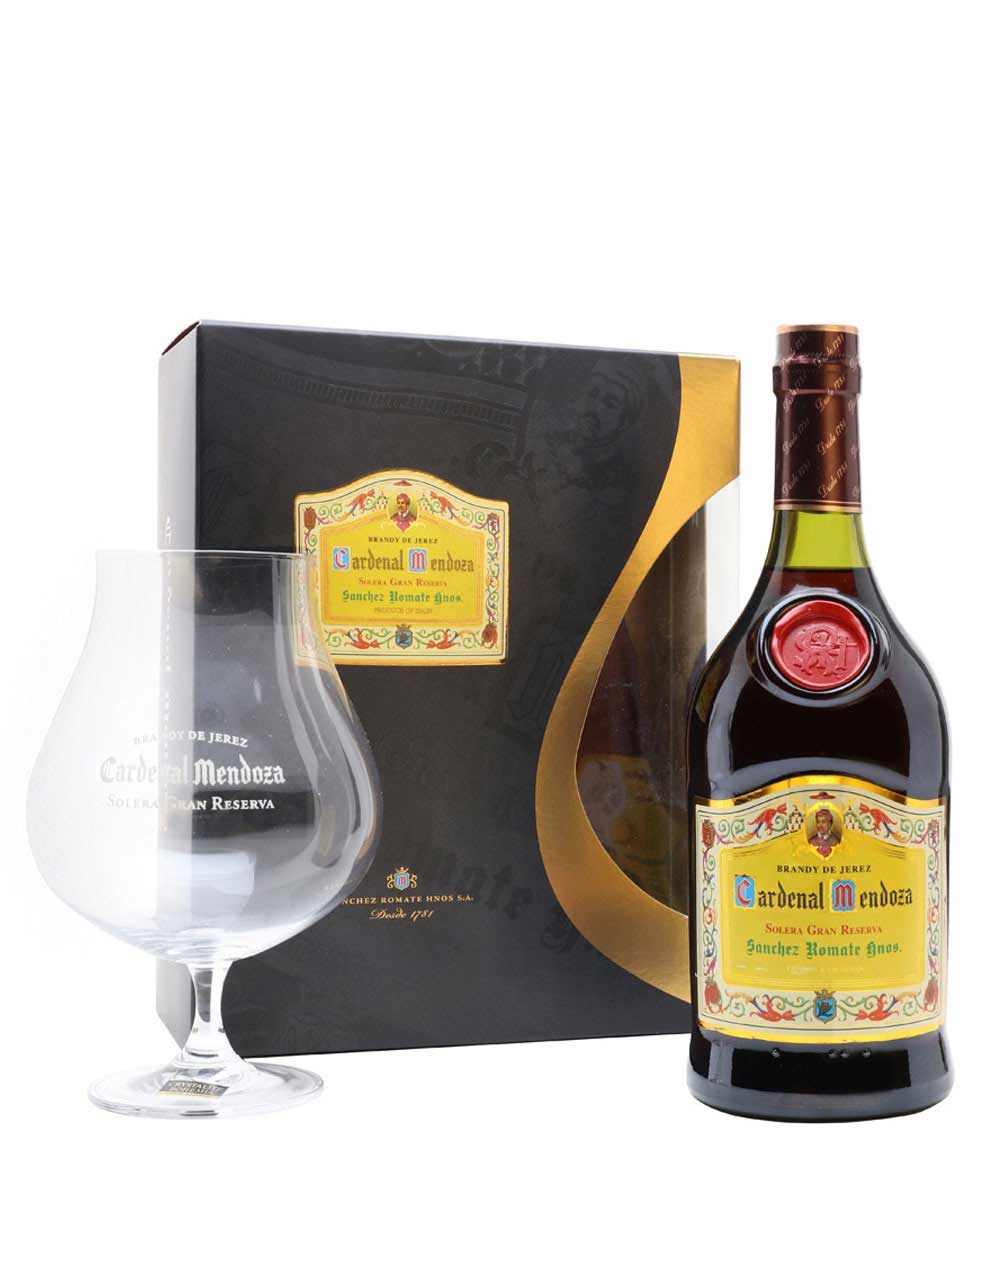 Cardenal Mendoza with Snifter